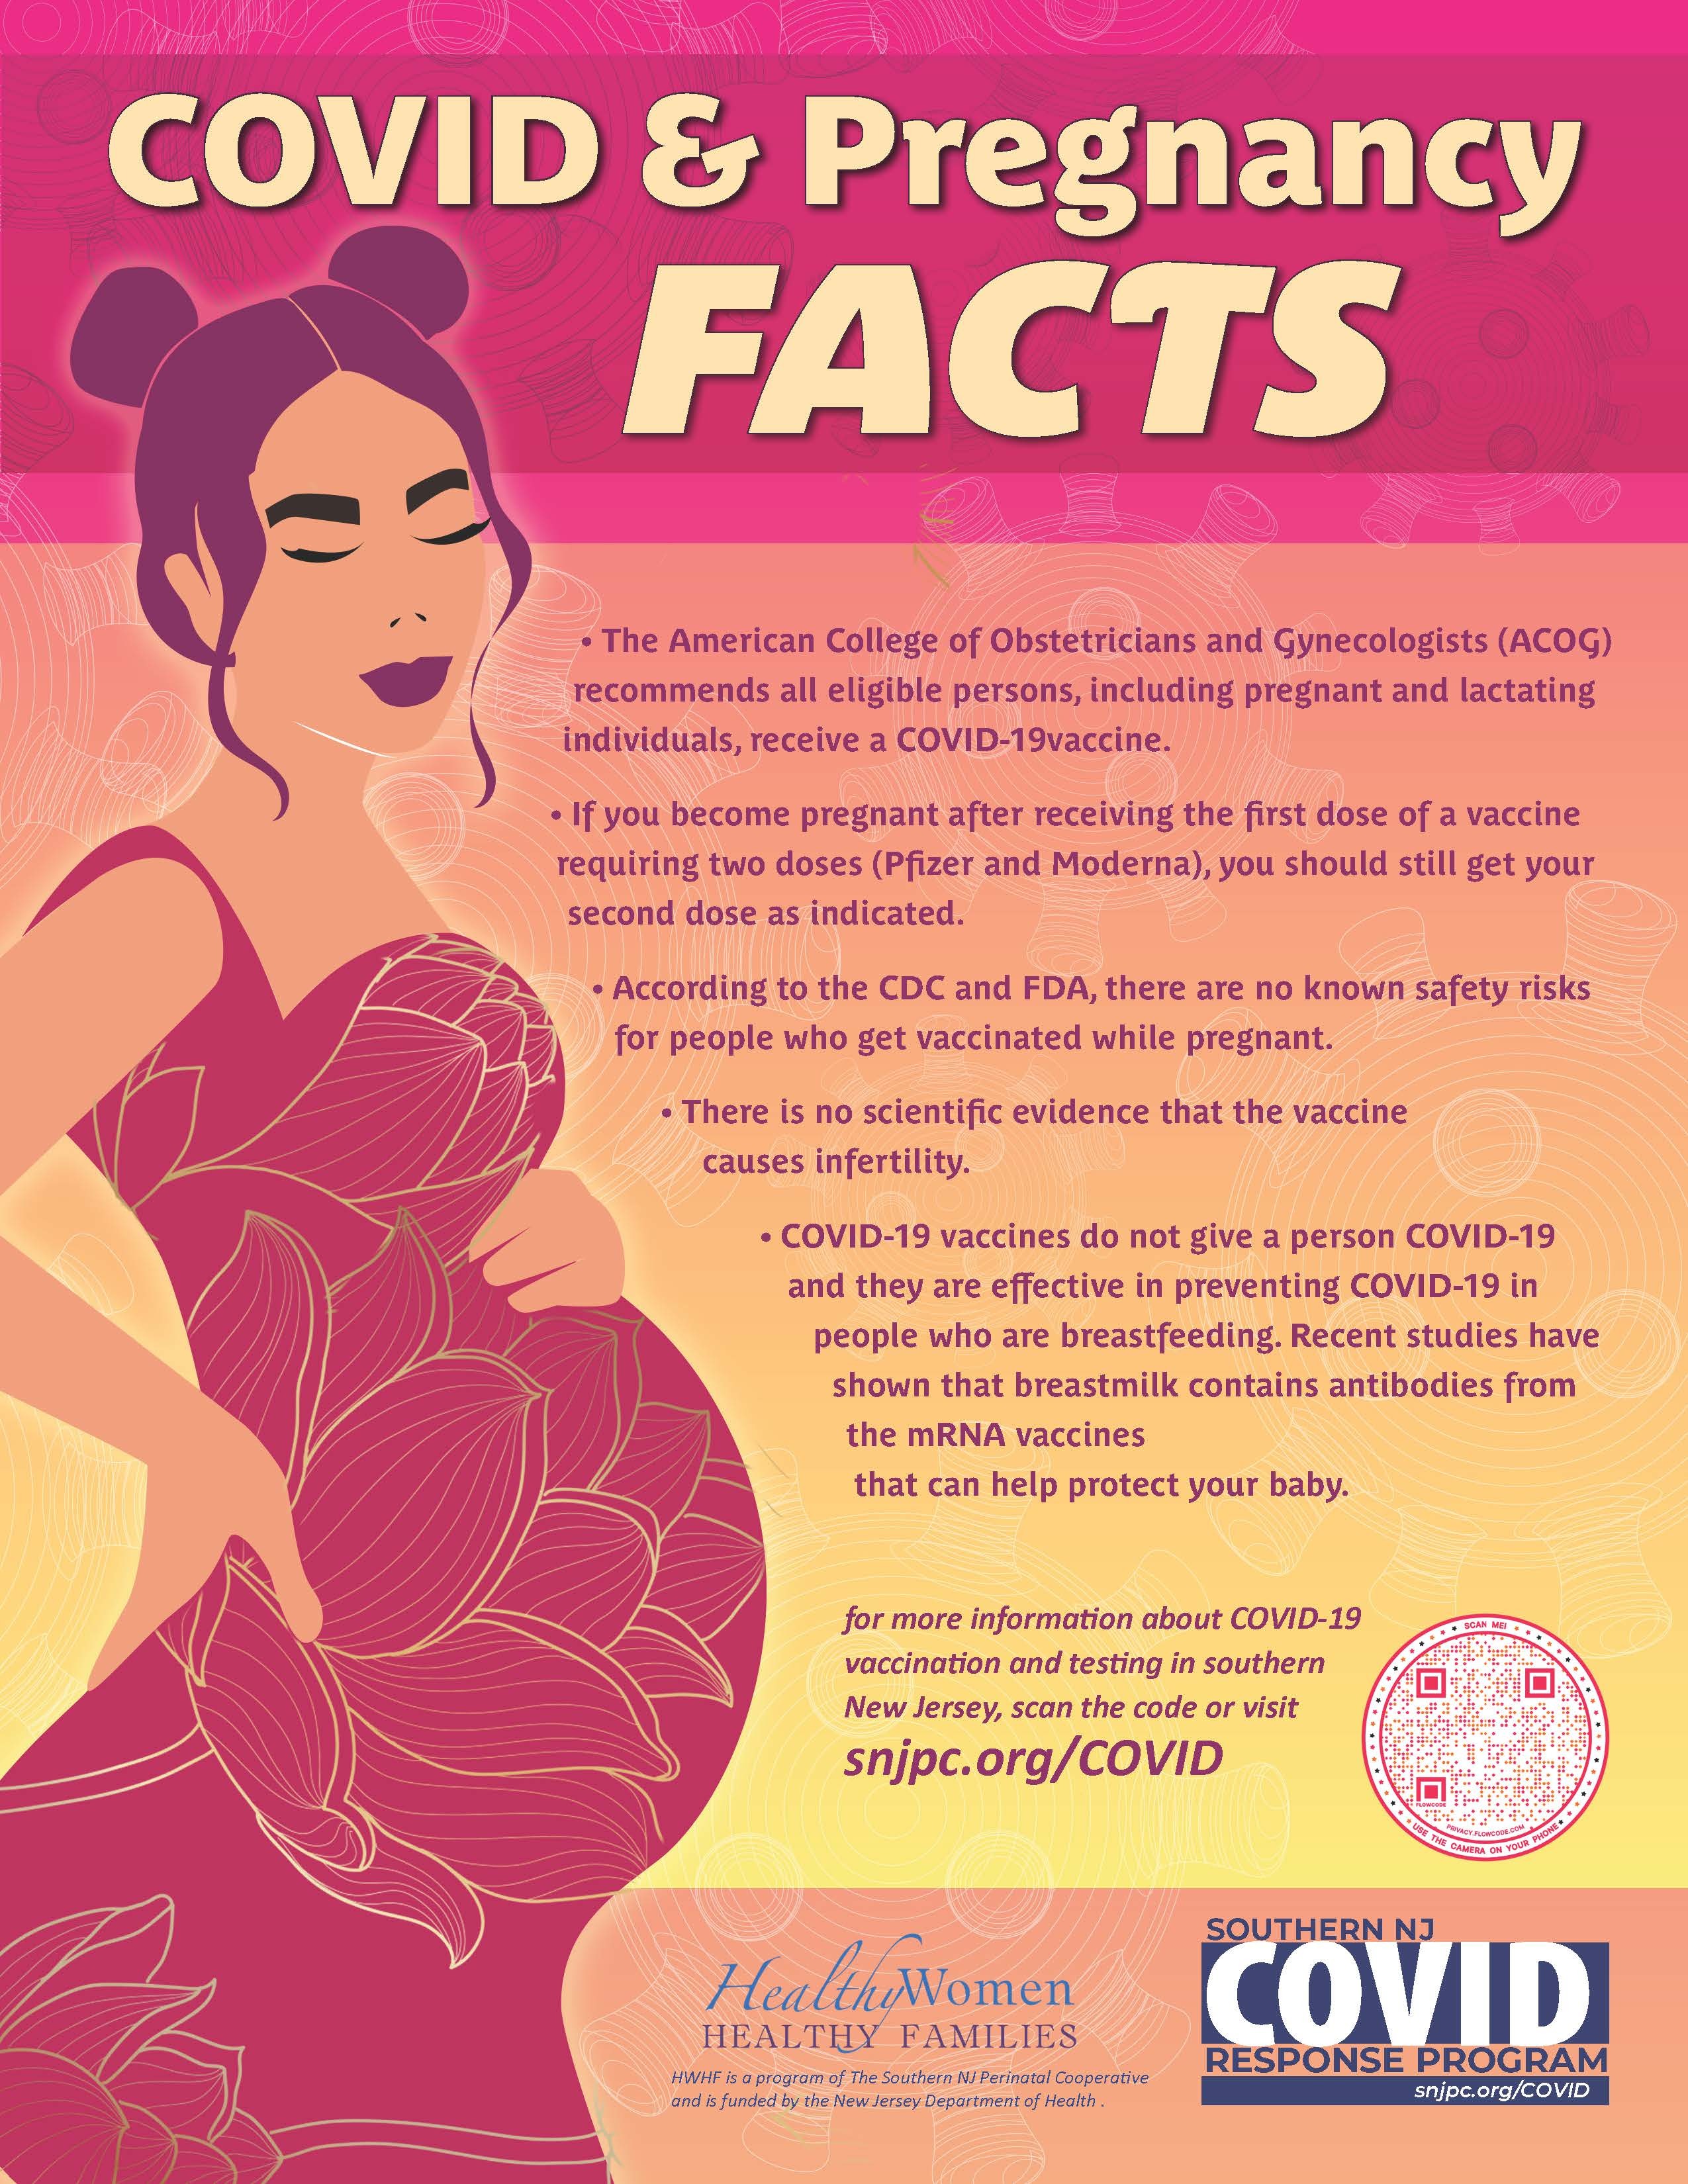 COVID & Pregnancy Facts flyer